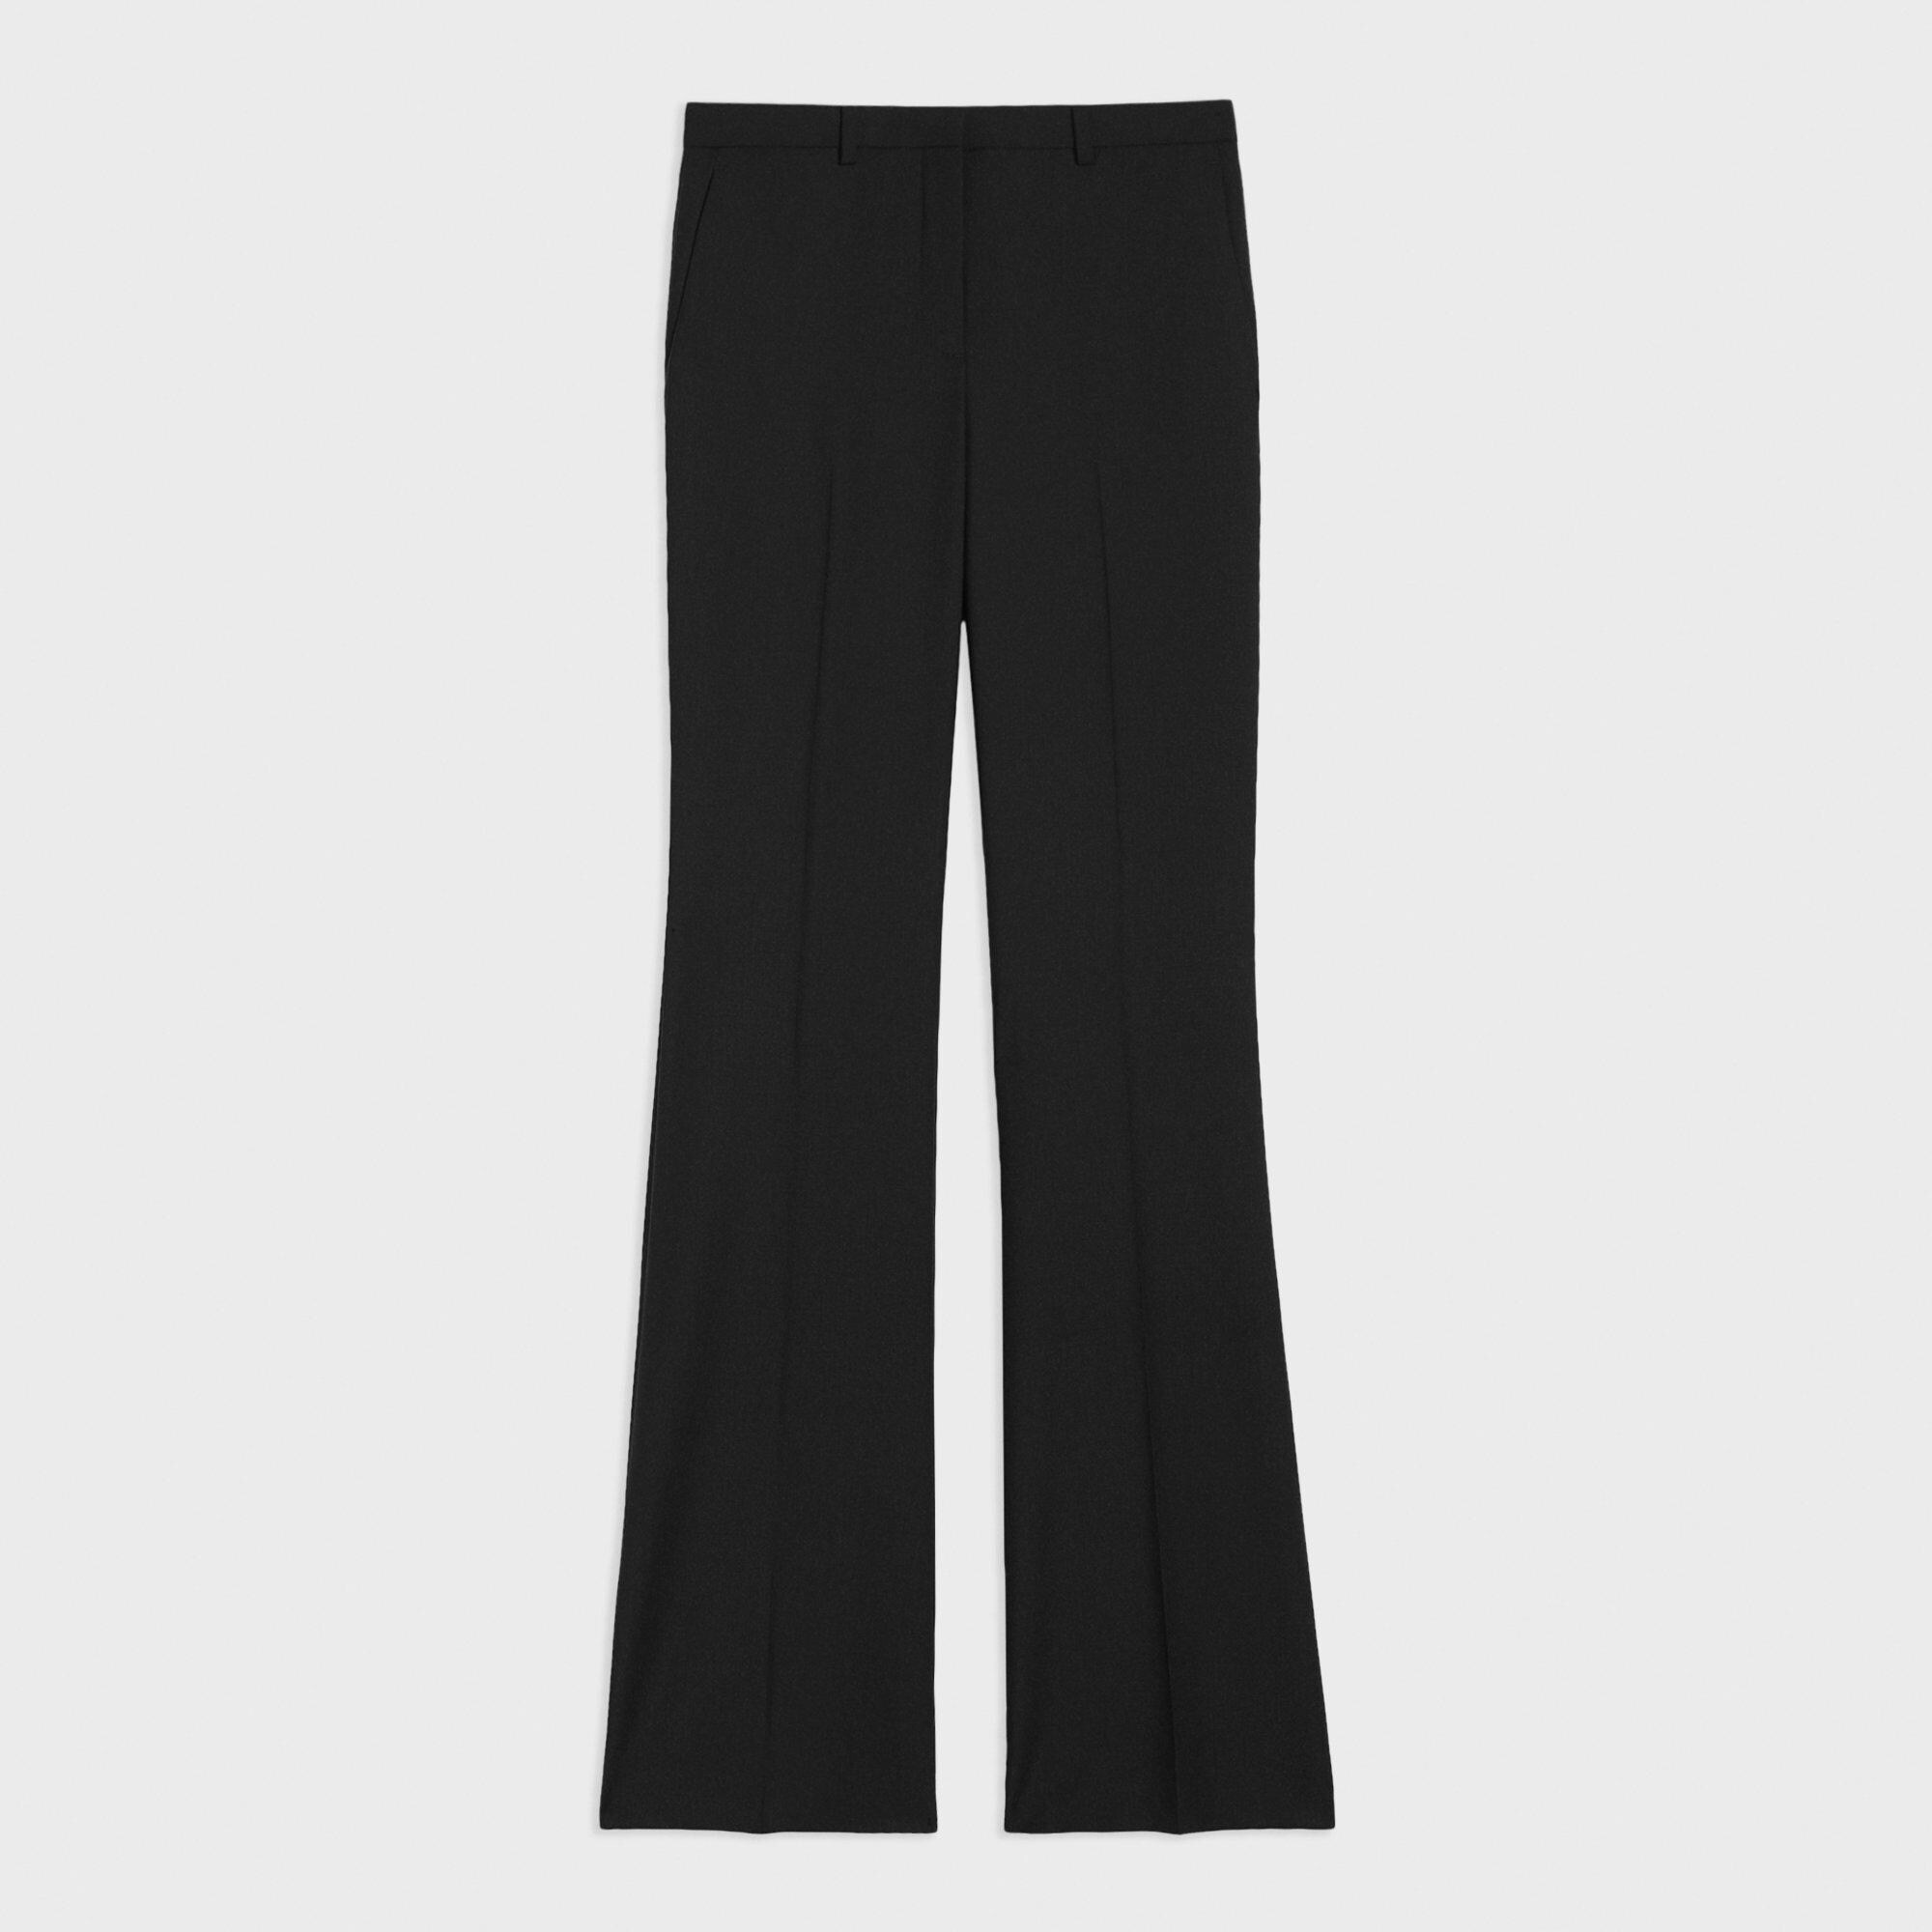 Laney mid-rise flare pant - graphite / xsmall